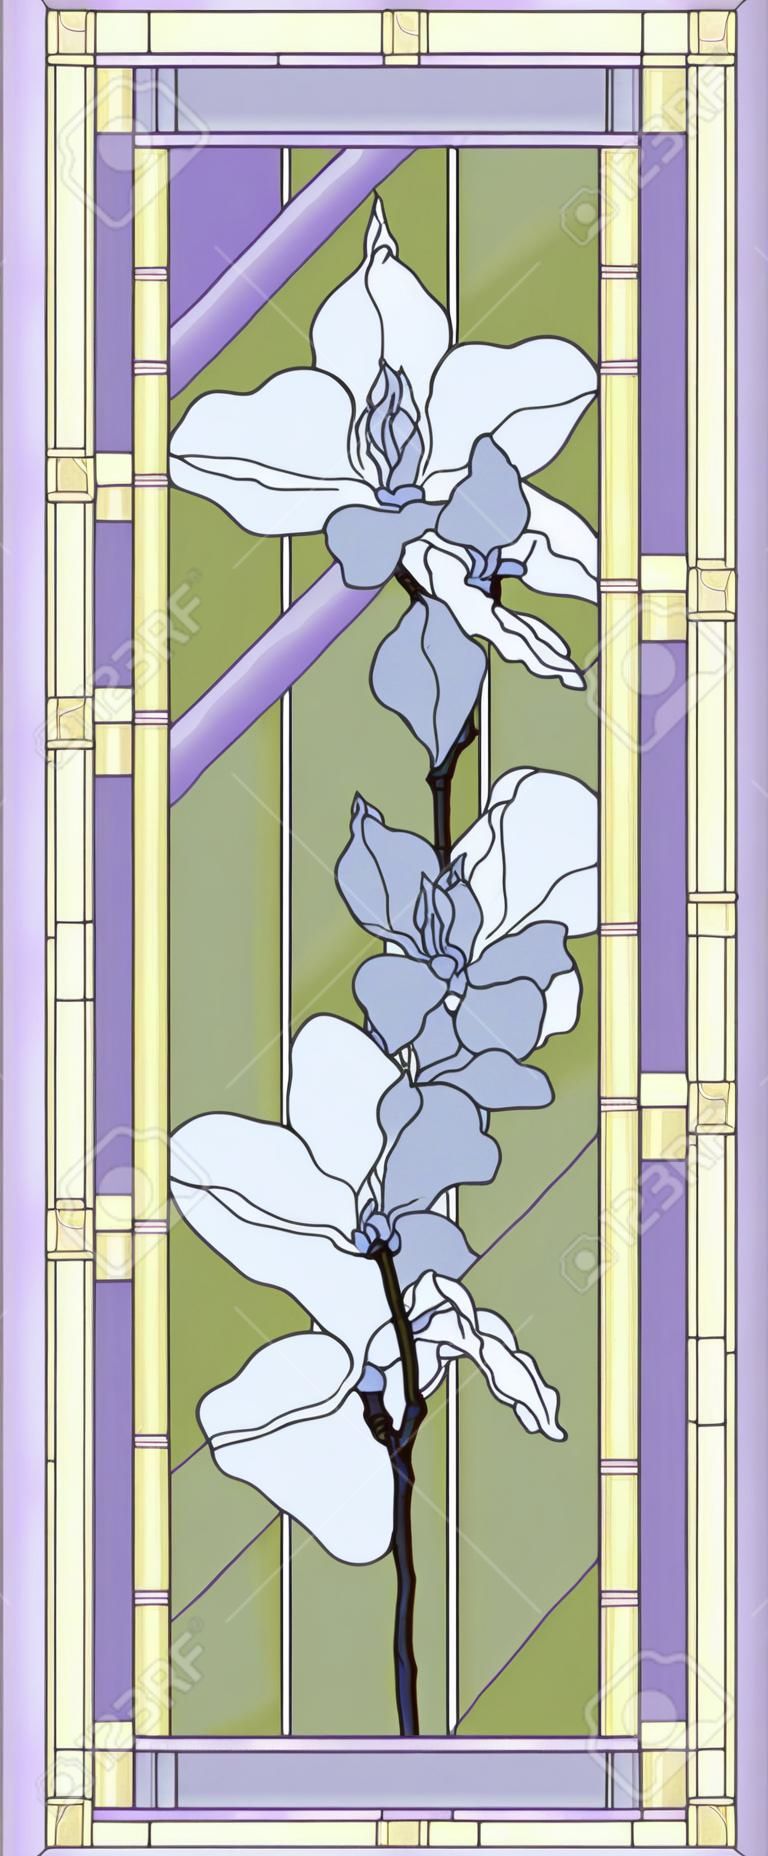 Stained-glass panel in a rectangular frame. Classic window, with orchid, abstract floral arrangement of buds and leaves in the tiffany technique. Window frame border, geometric pattern. Vector